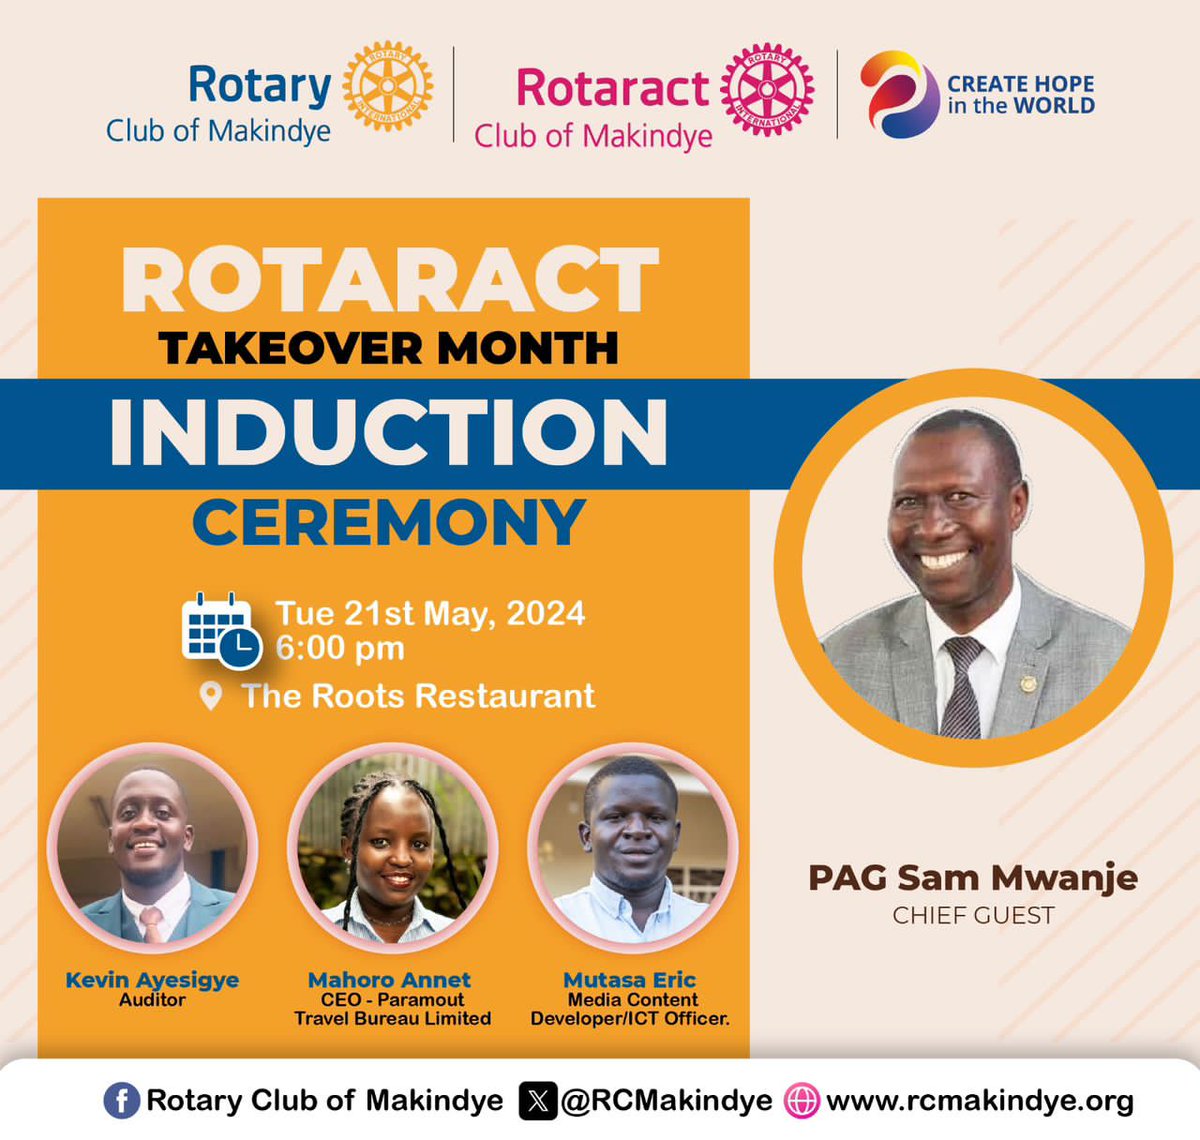 📌 The ROOTS RESTAURANT, Kafu Road, opposite DFCU bank. 🗒️ 21st May 2024 ⏰ : 6pm Meeting Type: 100% PHYSICAL Let's show up for our babies. Thanks alot mother club @RCMakindye